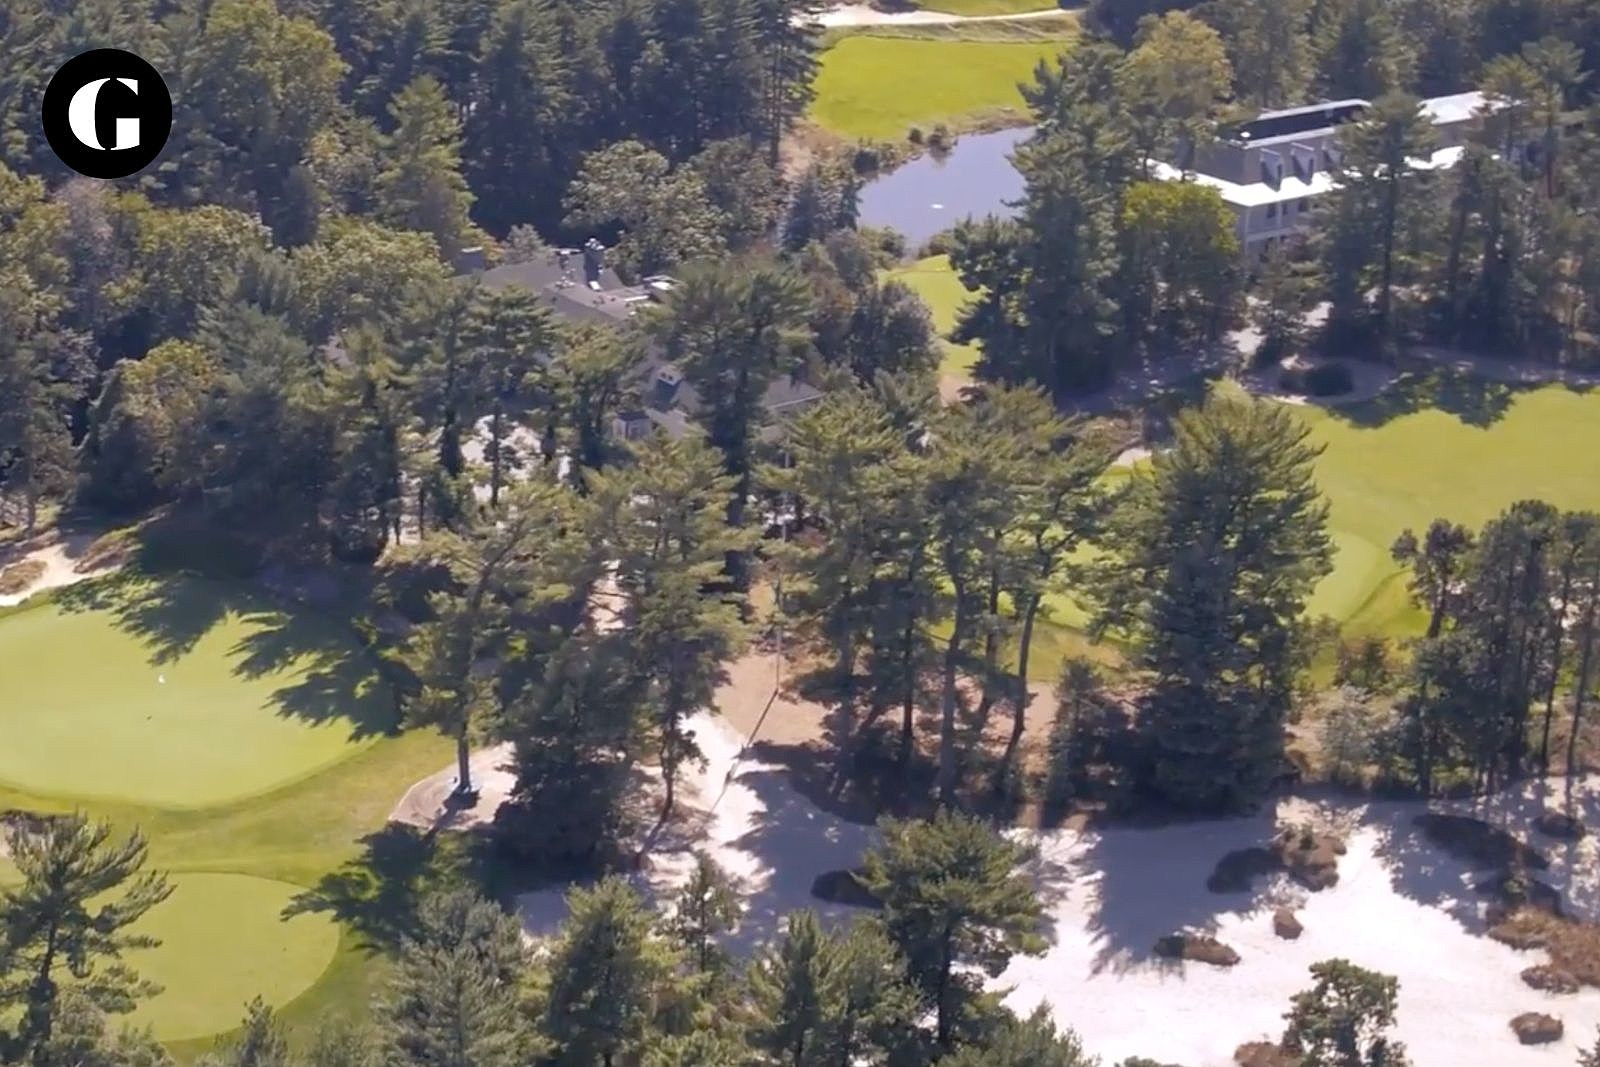 NJ settles gender bias claims with renowned Pine Valley Golf Club pic